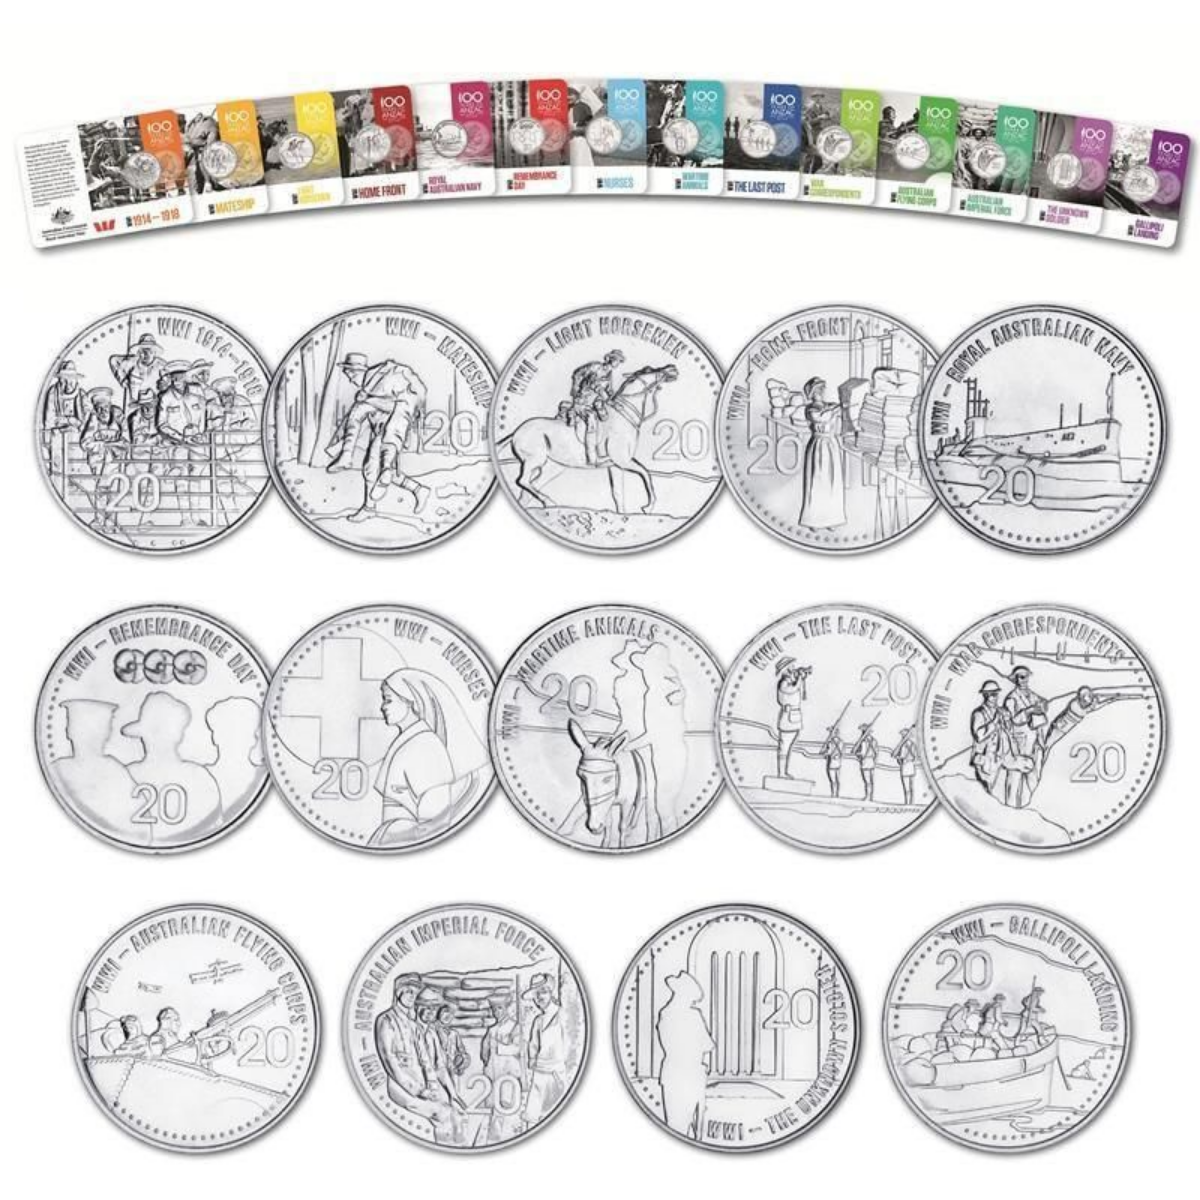 Australia Anzacs Remembered 2015 20c Uncirculated 14-Coin Collection